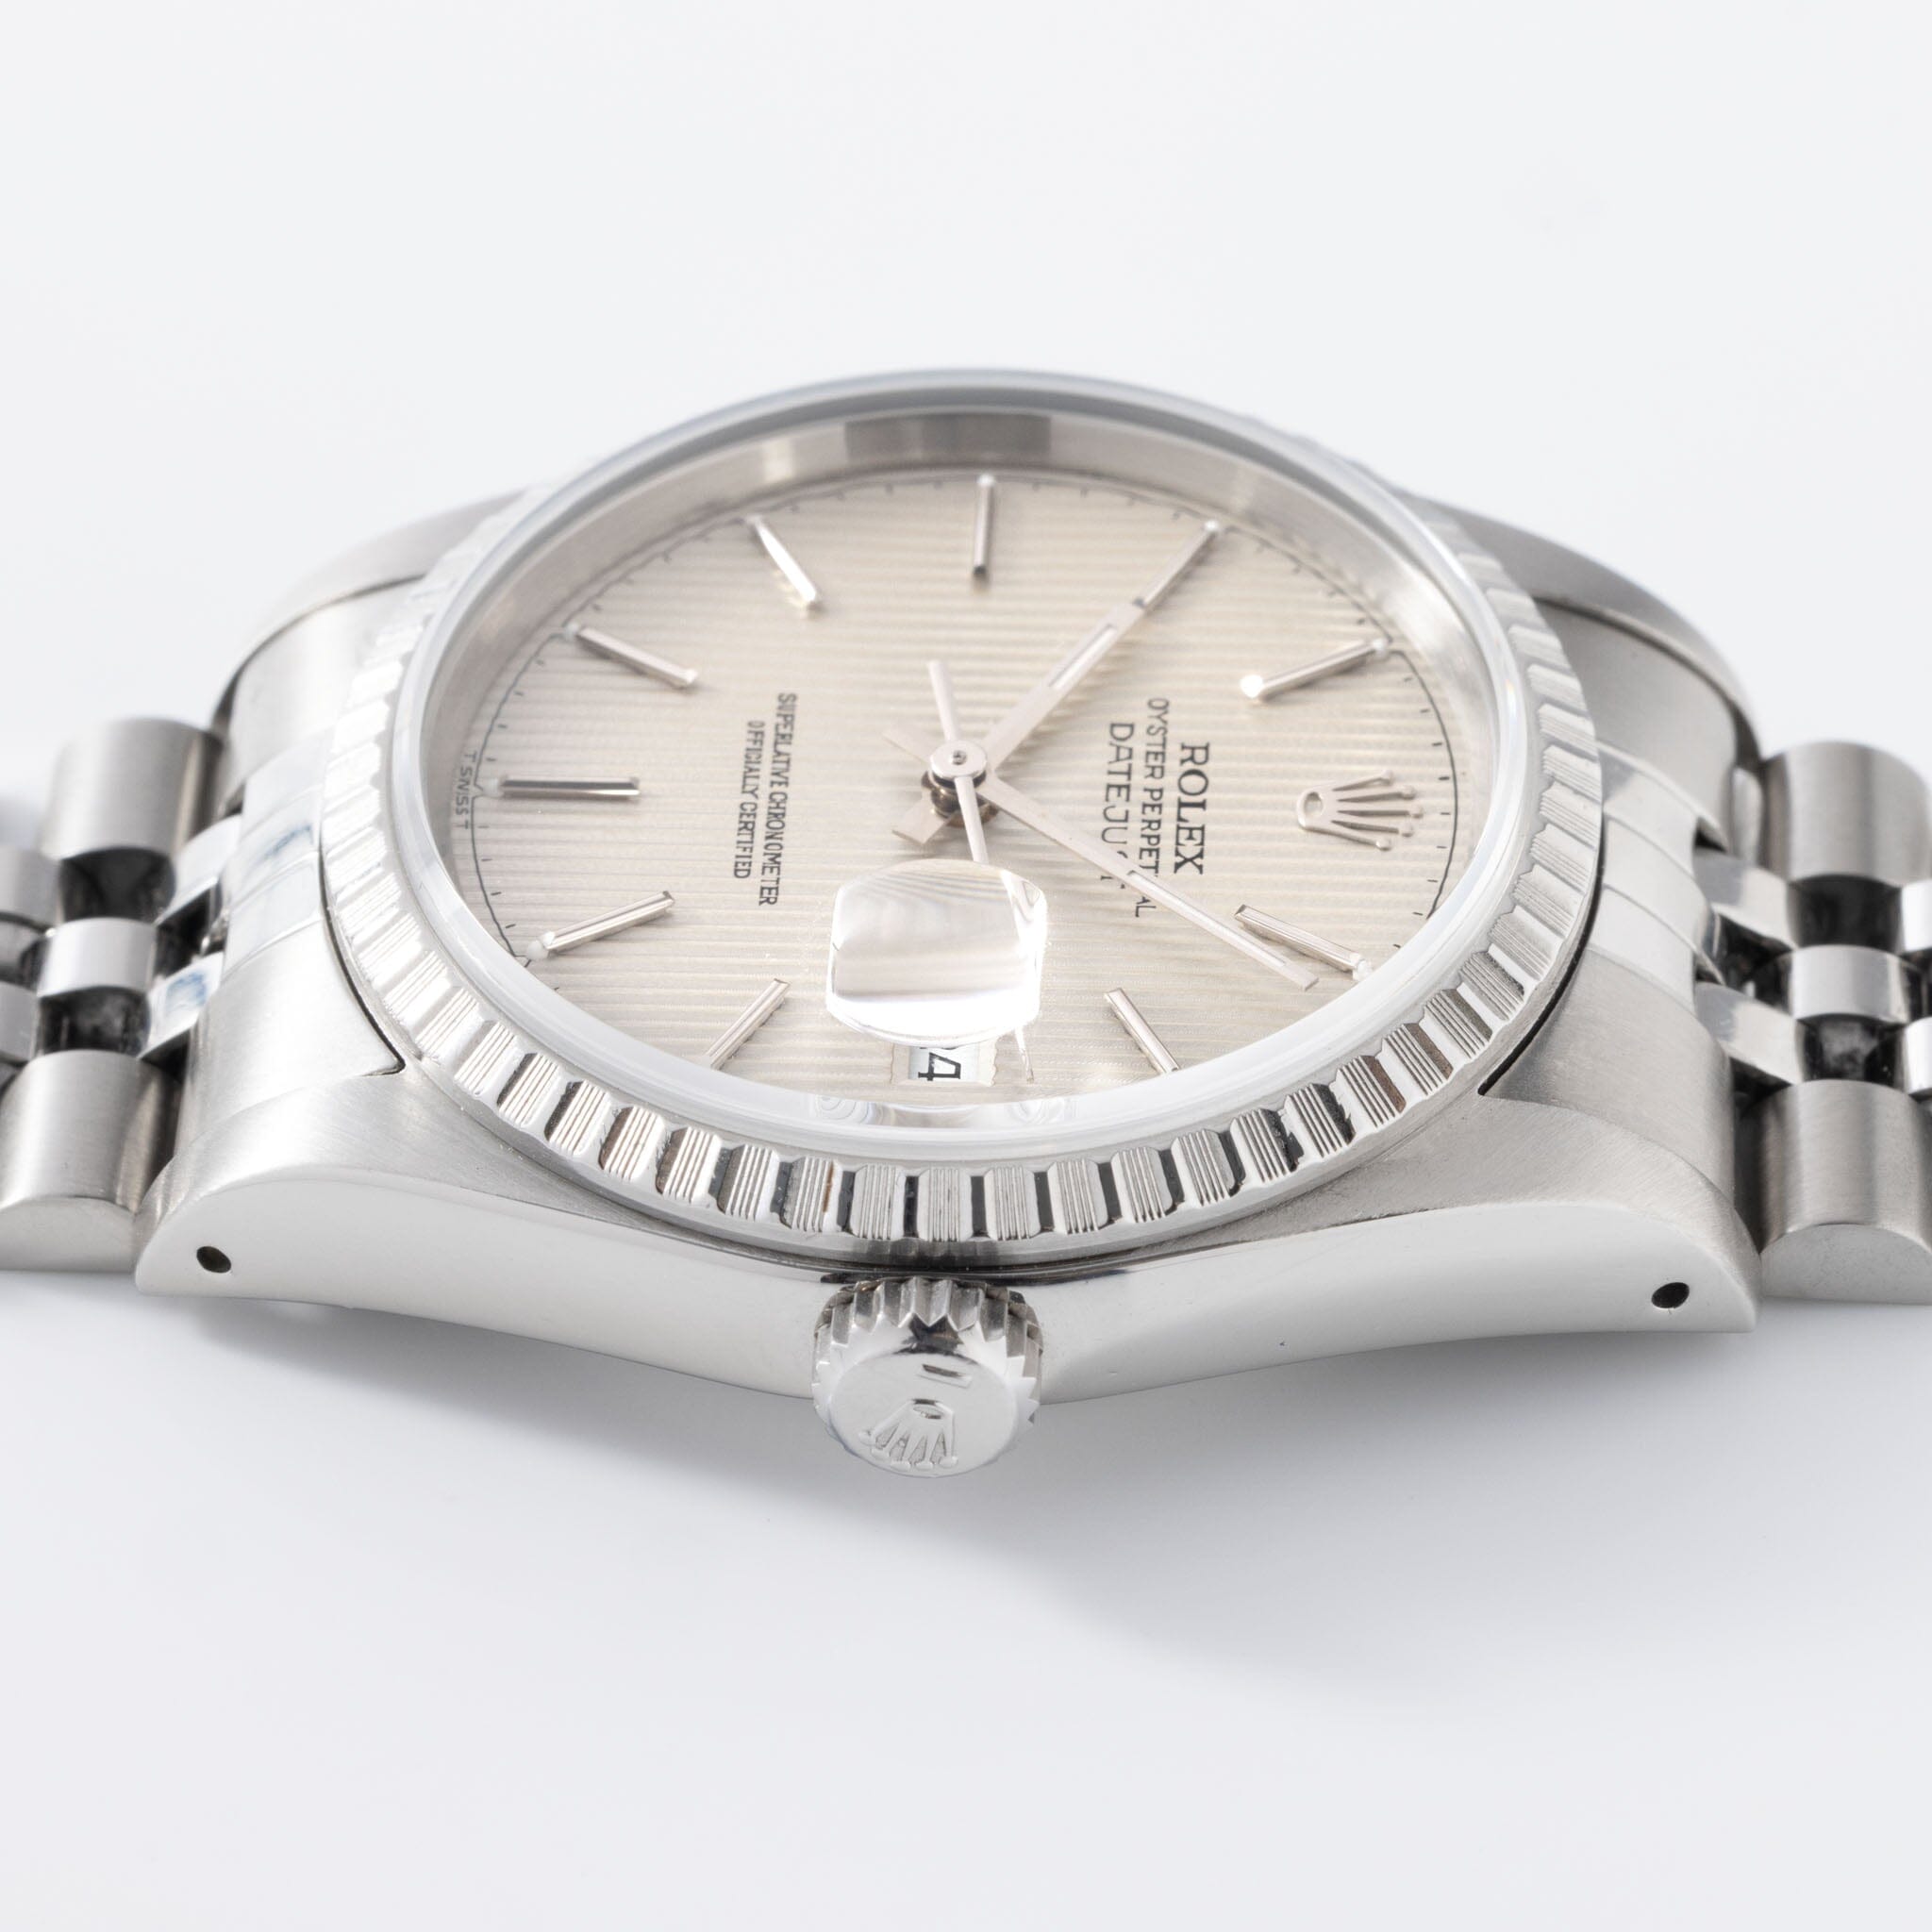 Rolex Datejust Silver Tapestry Dial ref 16220